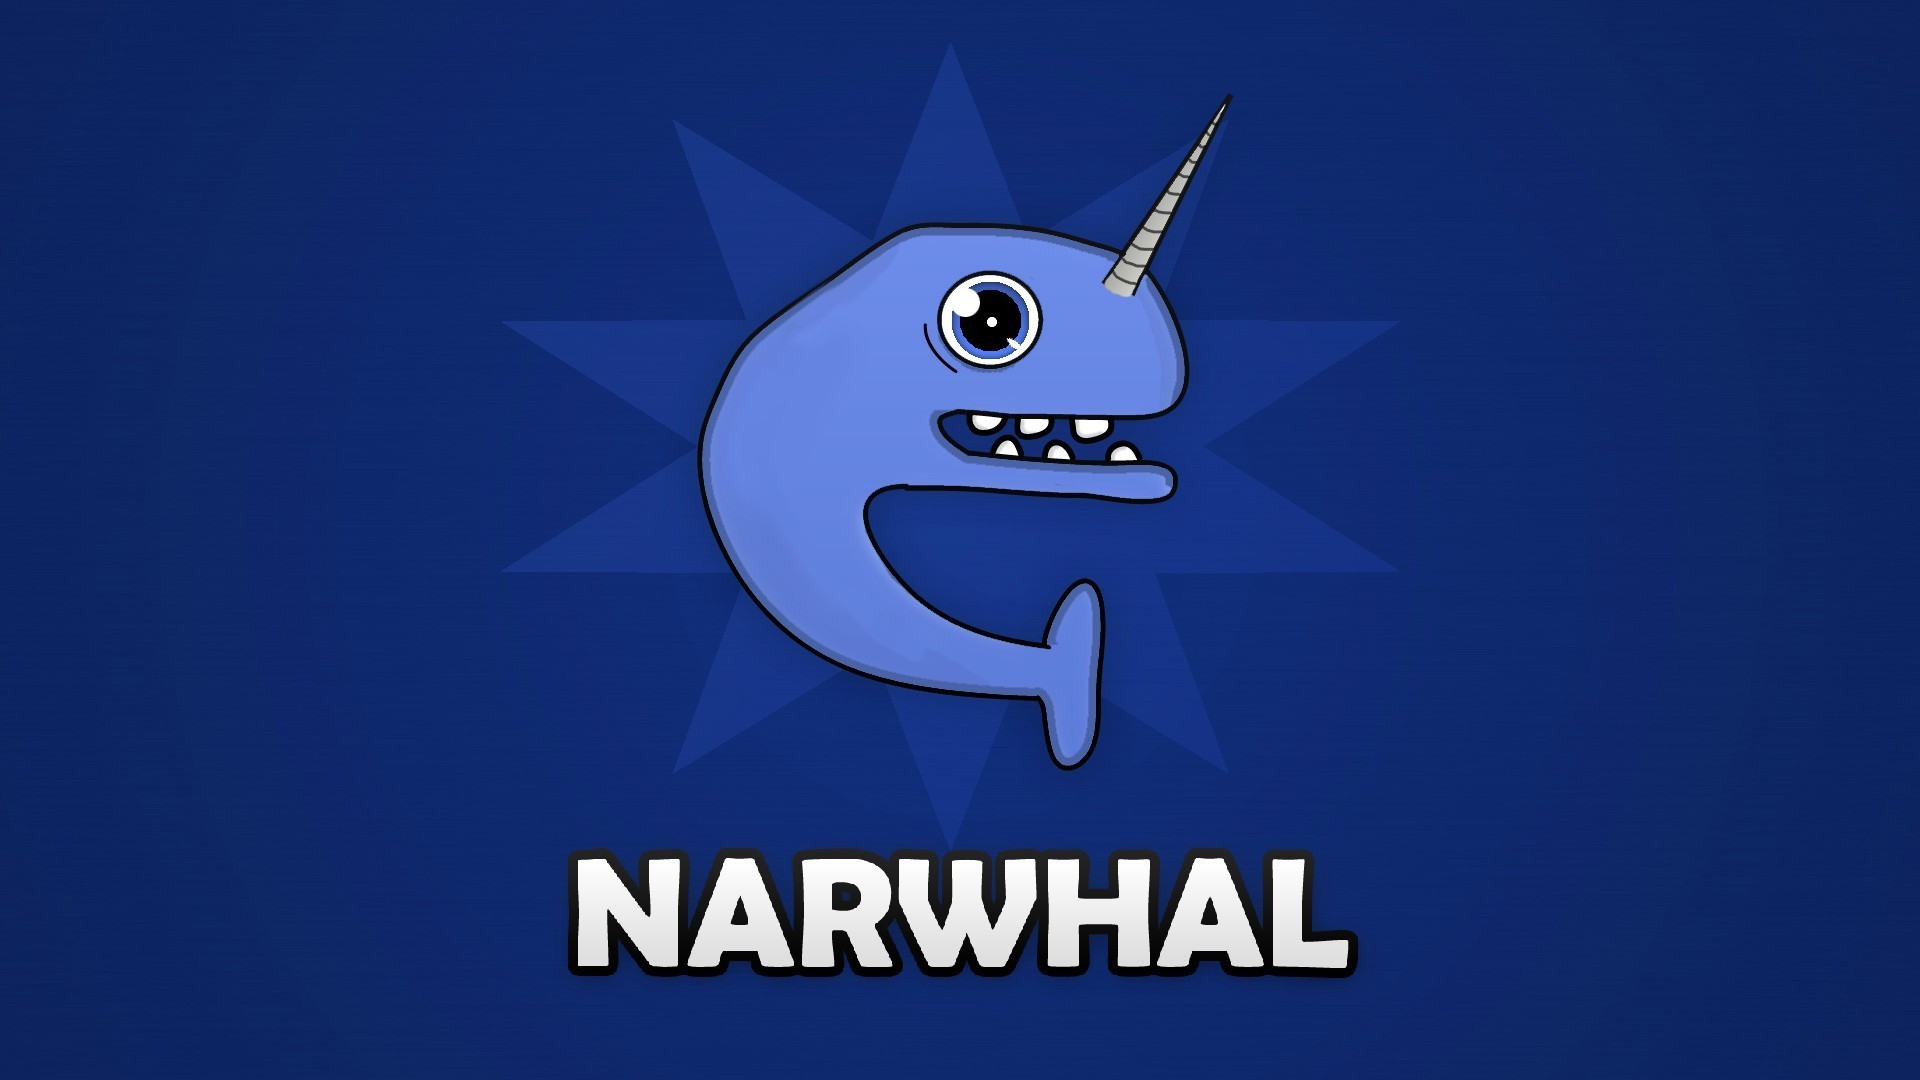 Narwhal Wallpapers HD Wallpapers Download Free Images Wallpaper [wallpaper981.blogspot.com]